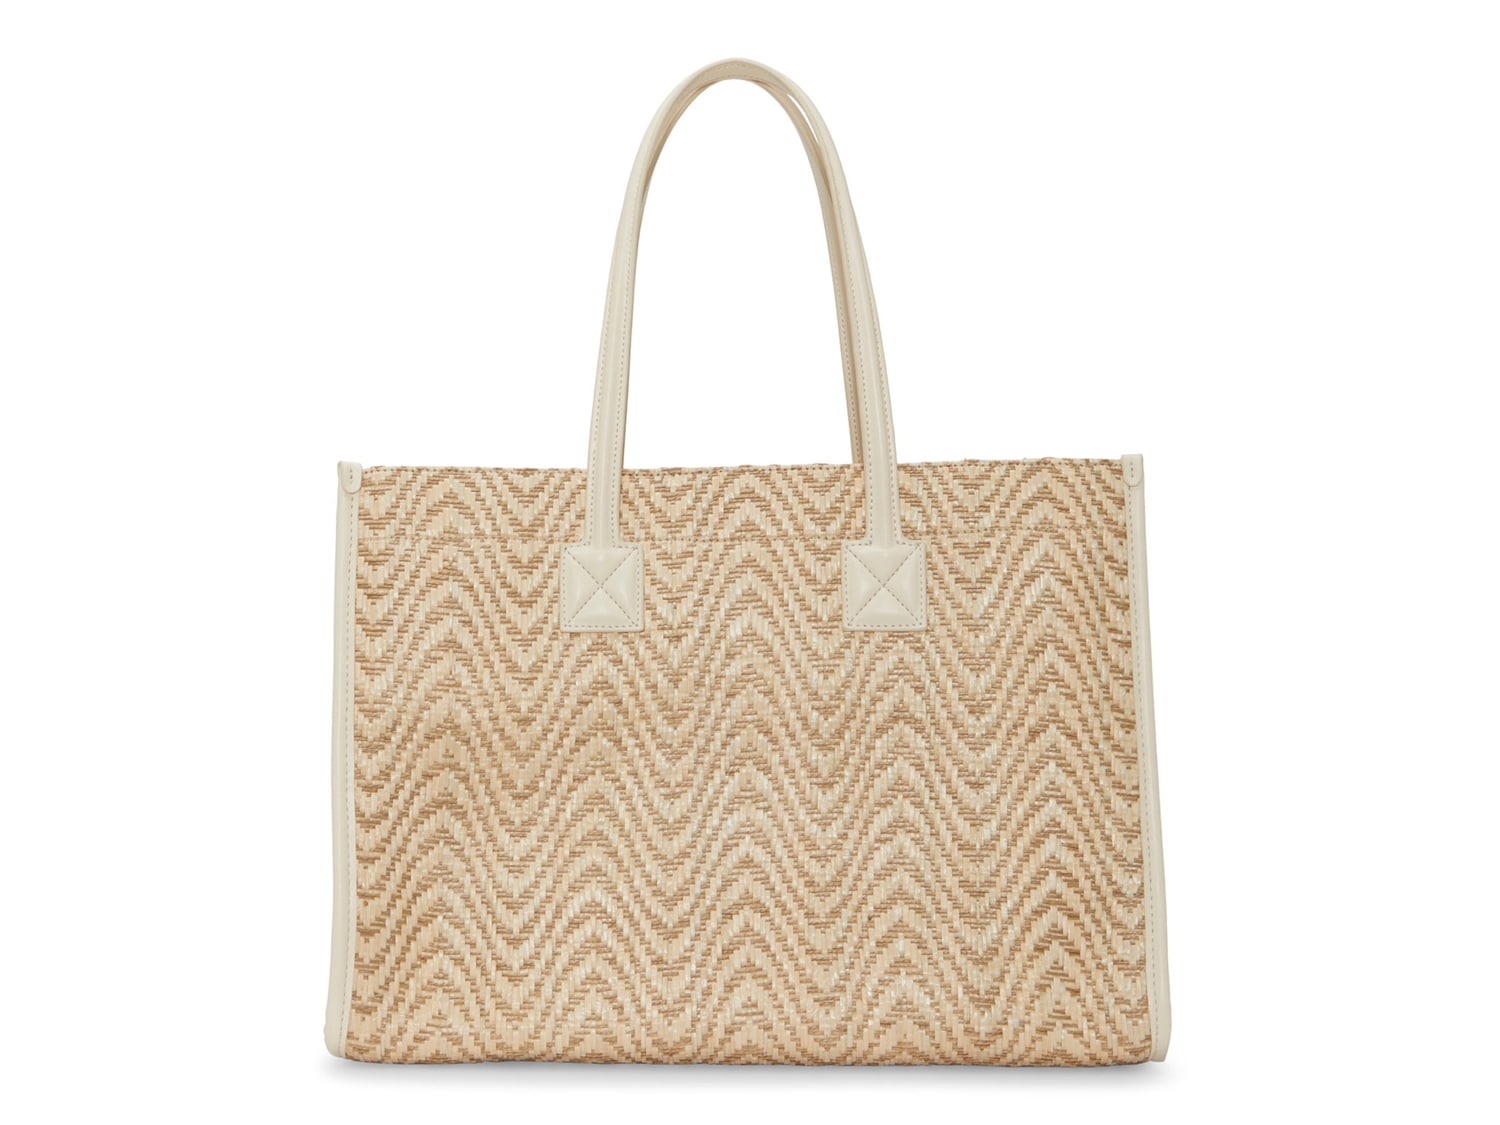 Vince Camuto Rope and Canvas Tote Bag - Zest 